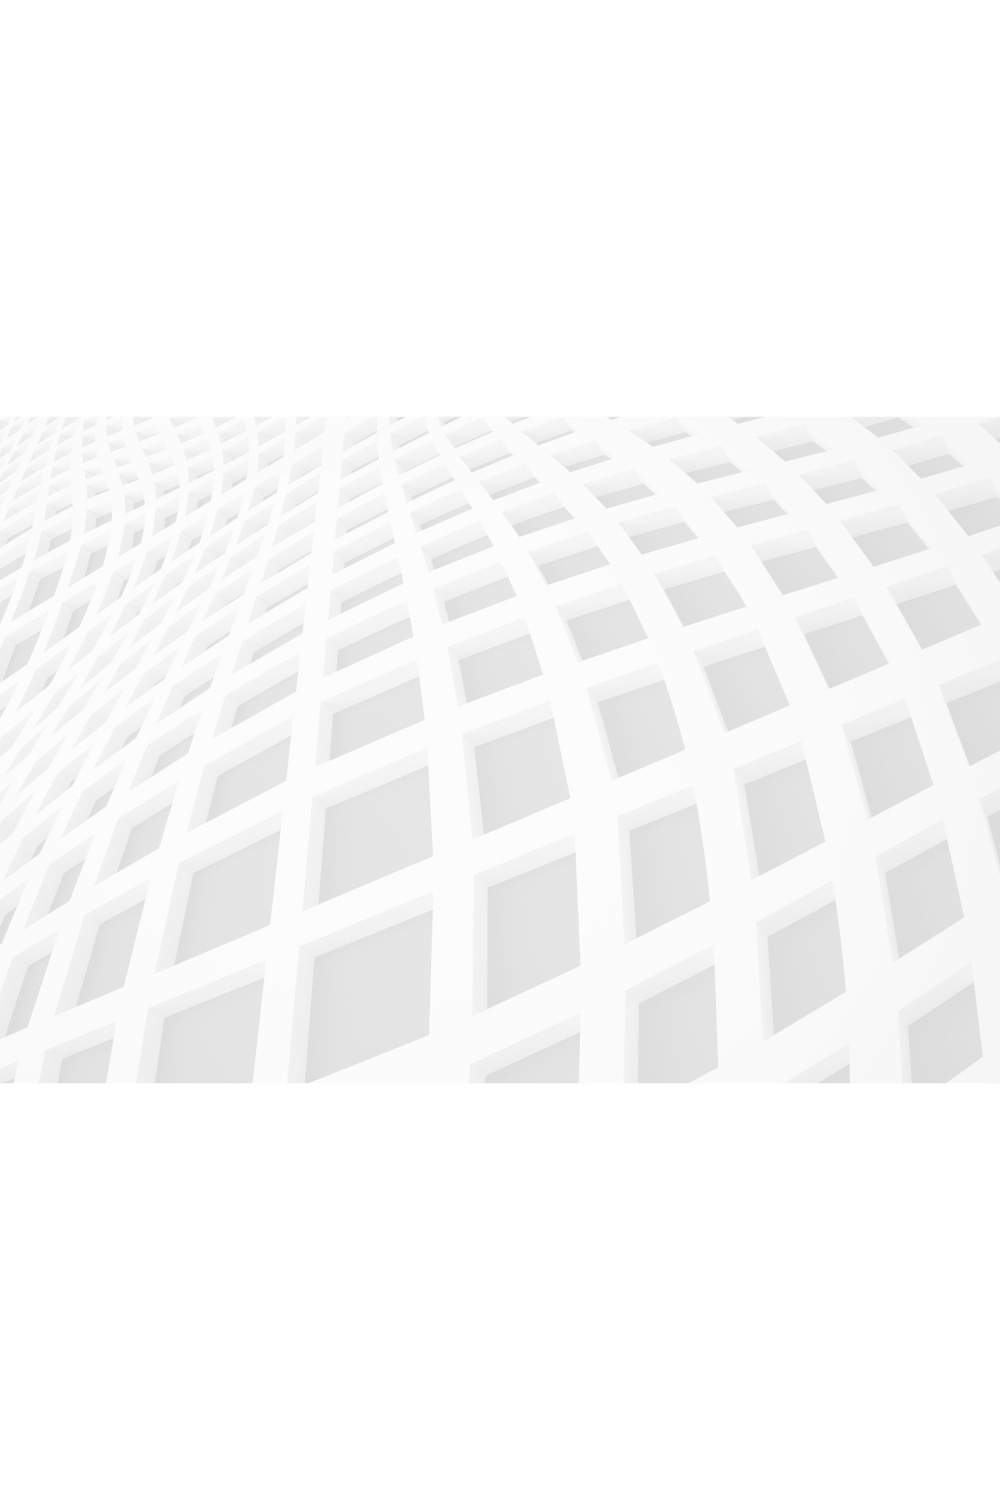 White Geometry Backgrounds pinterest preview image.